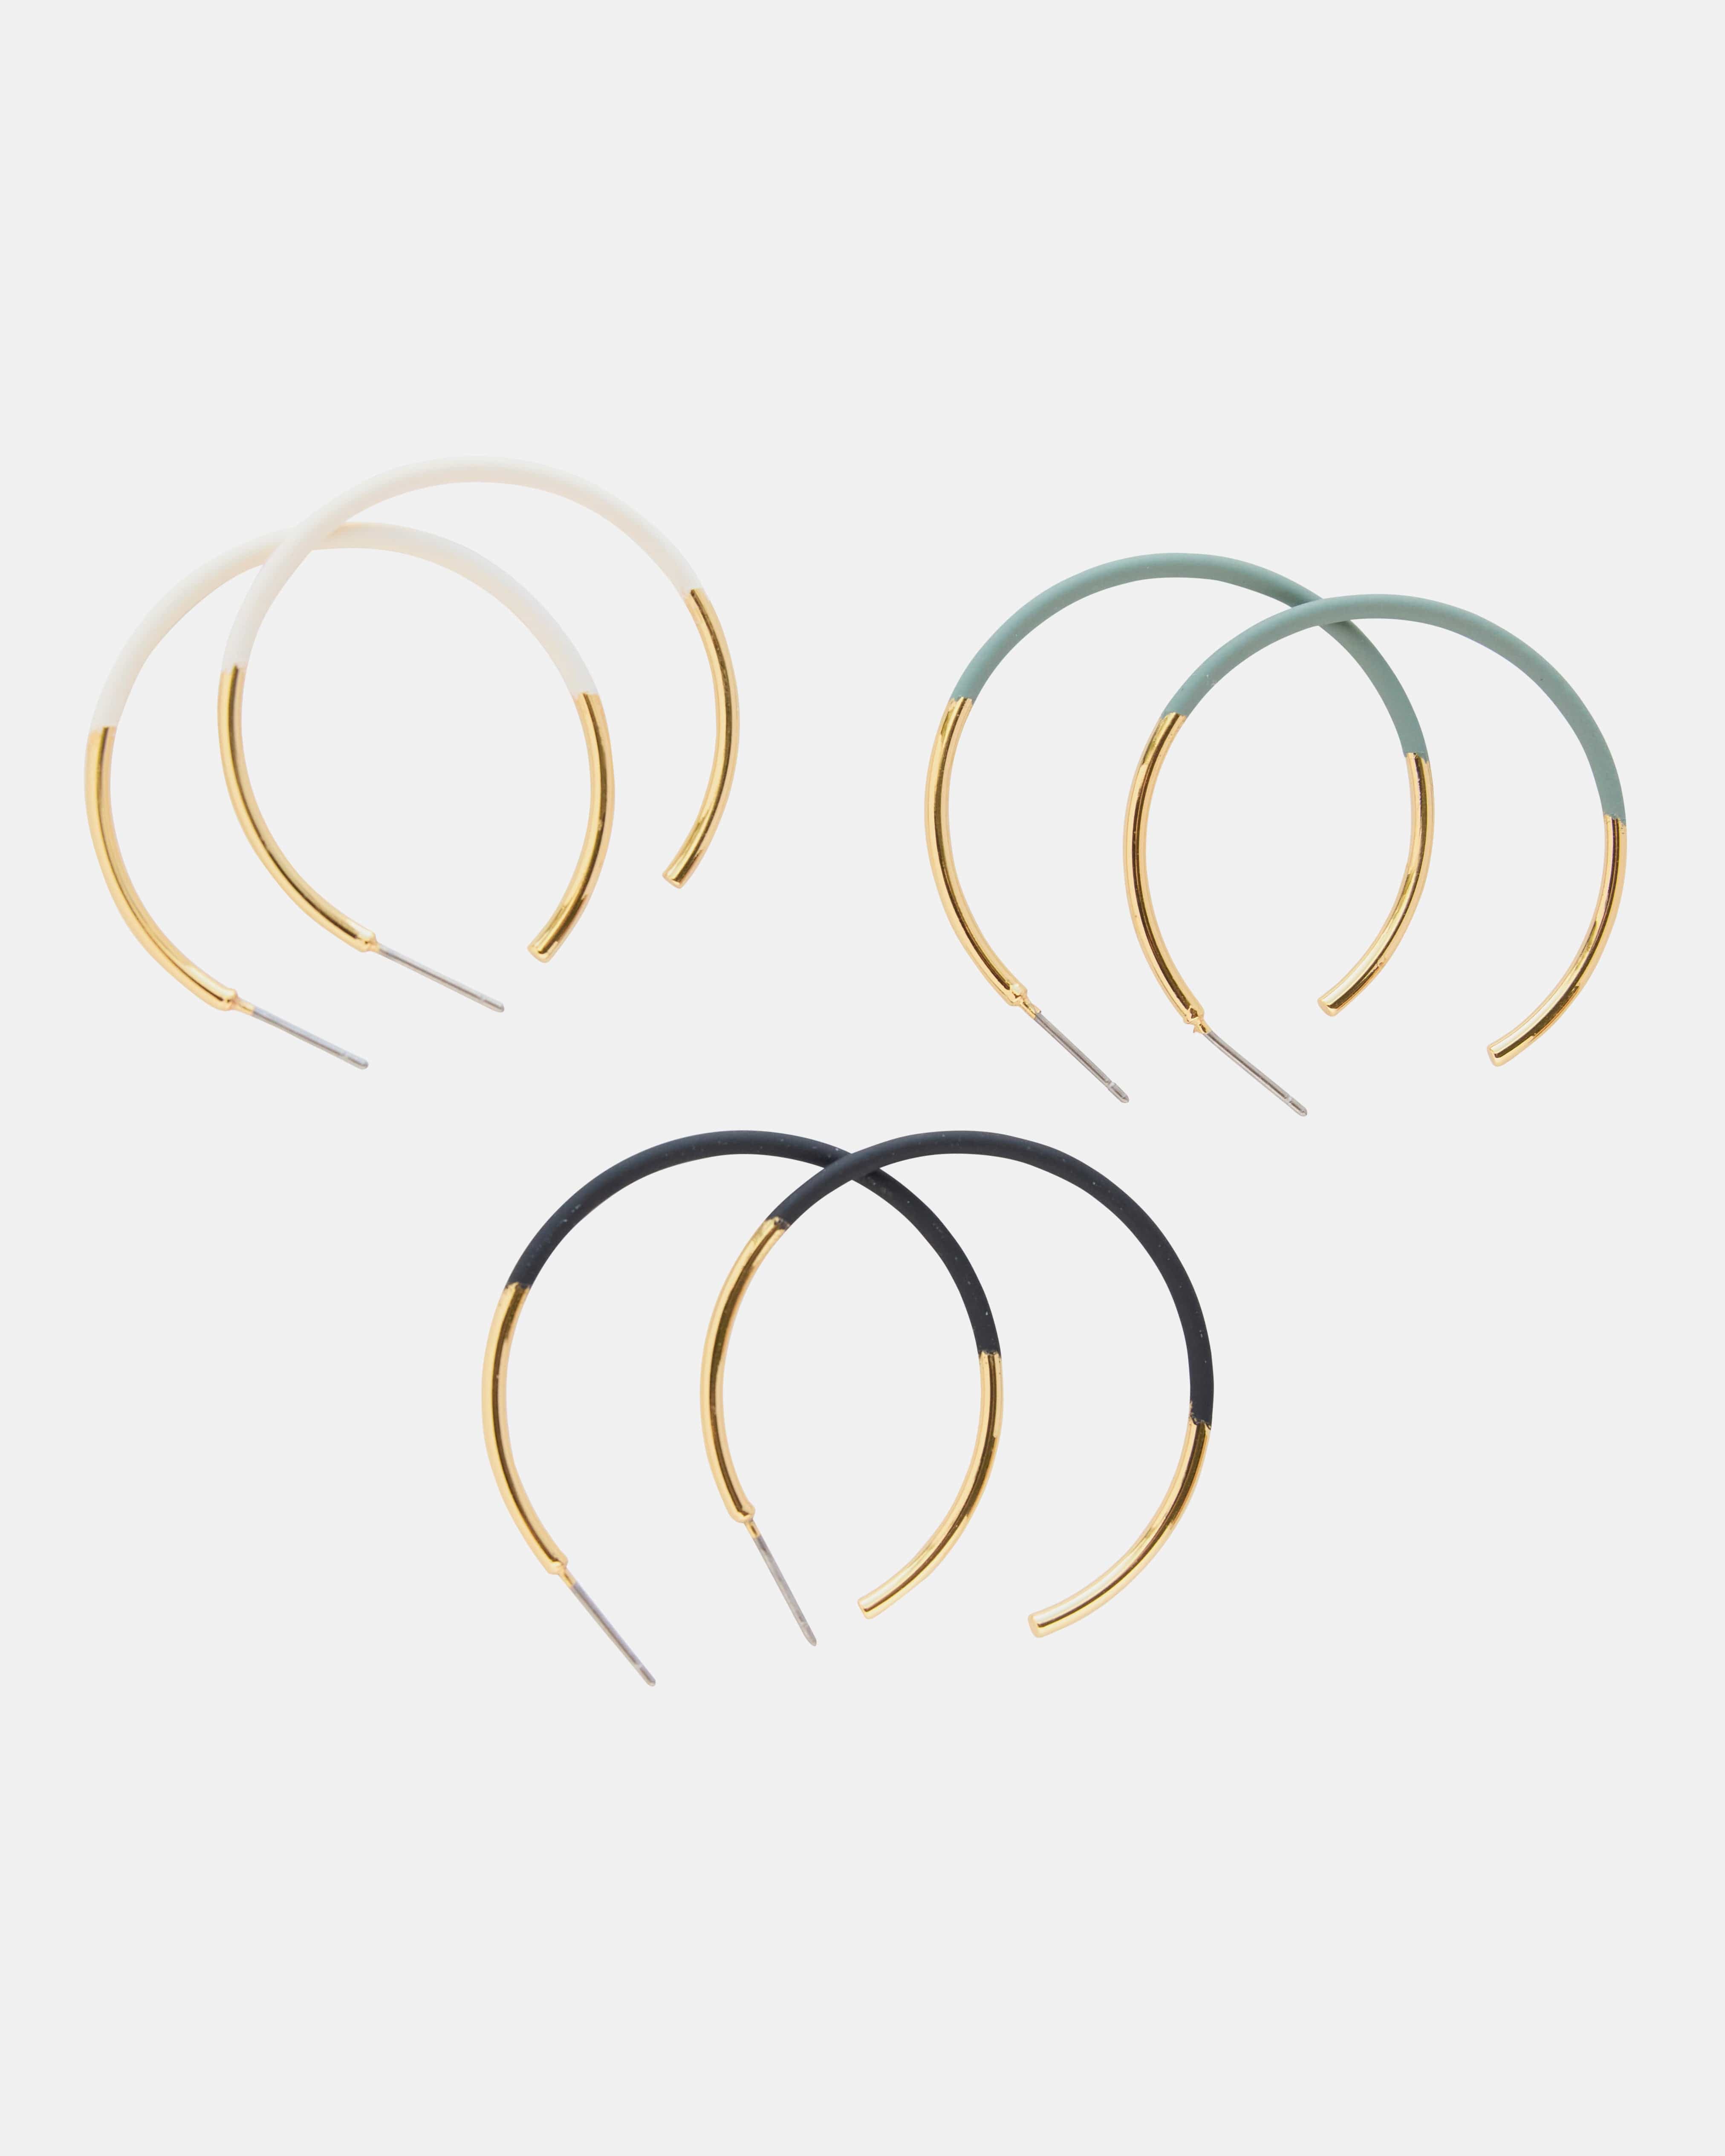 Three-piece earring set of hoops in gold, green, black and white.